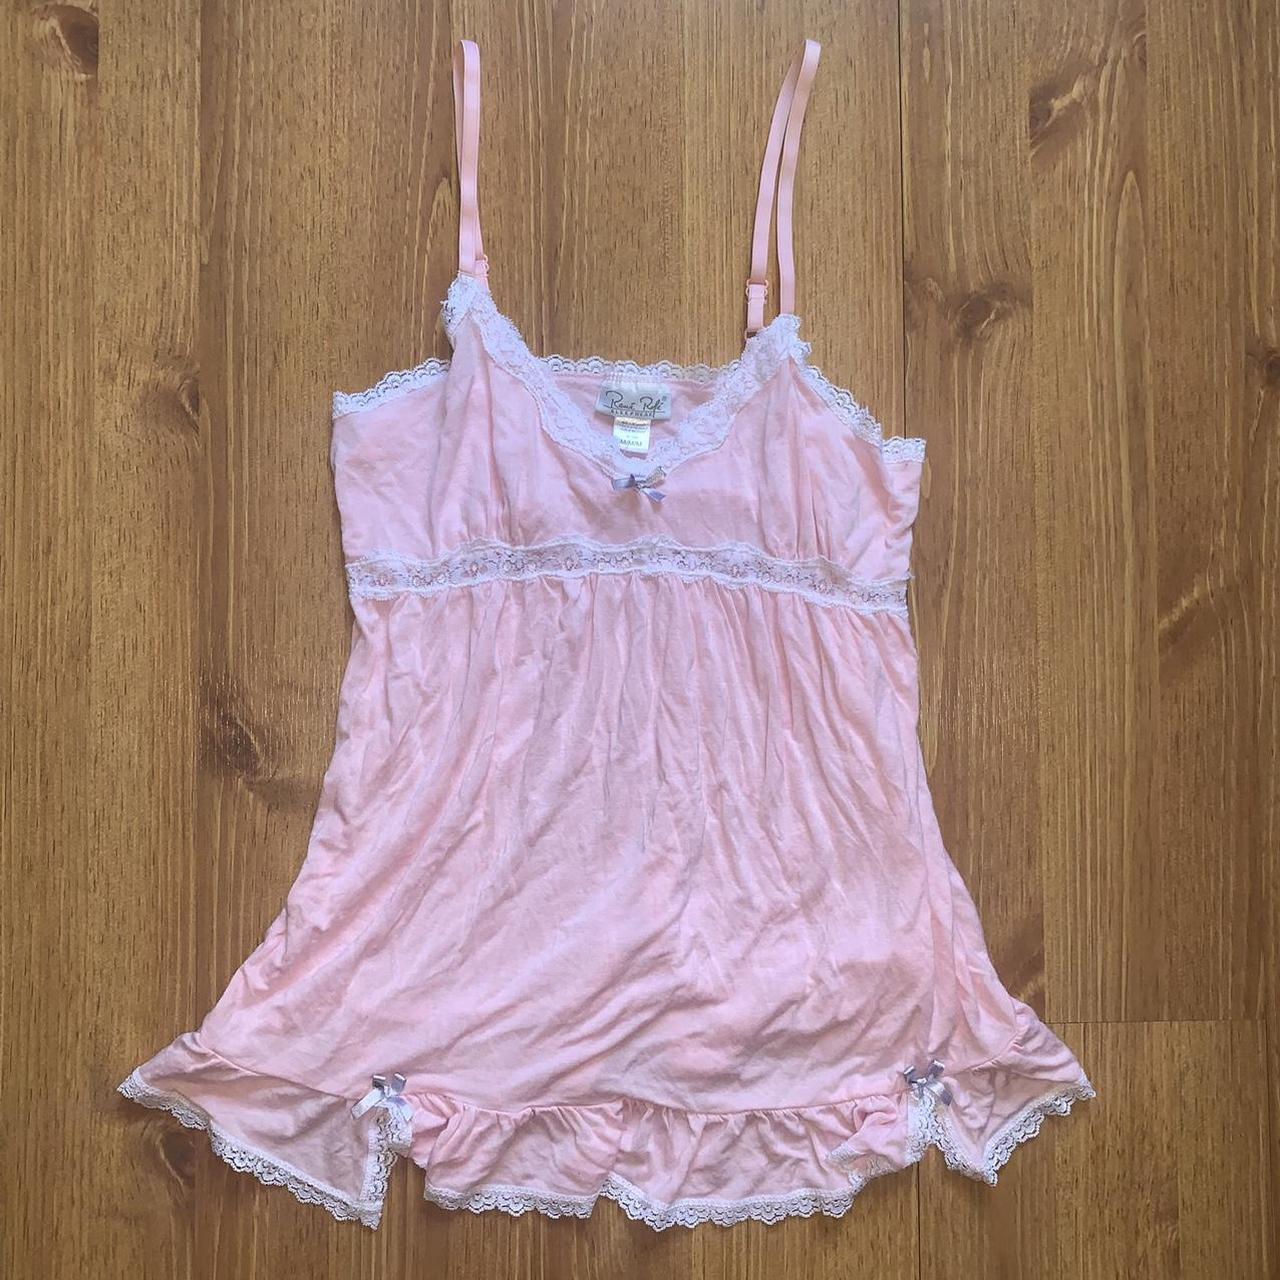 Pink with white lace mini sleep dress with bows -... - Depop